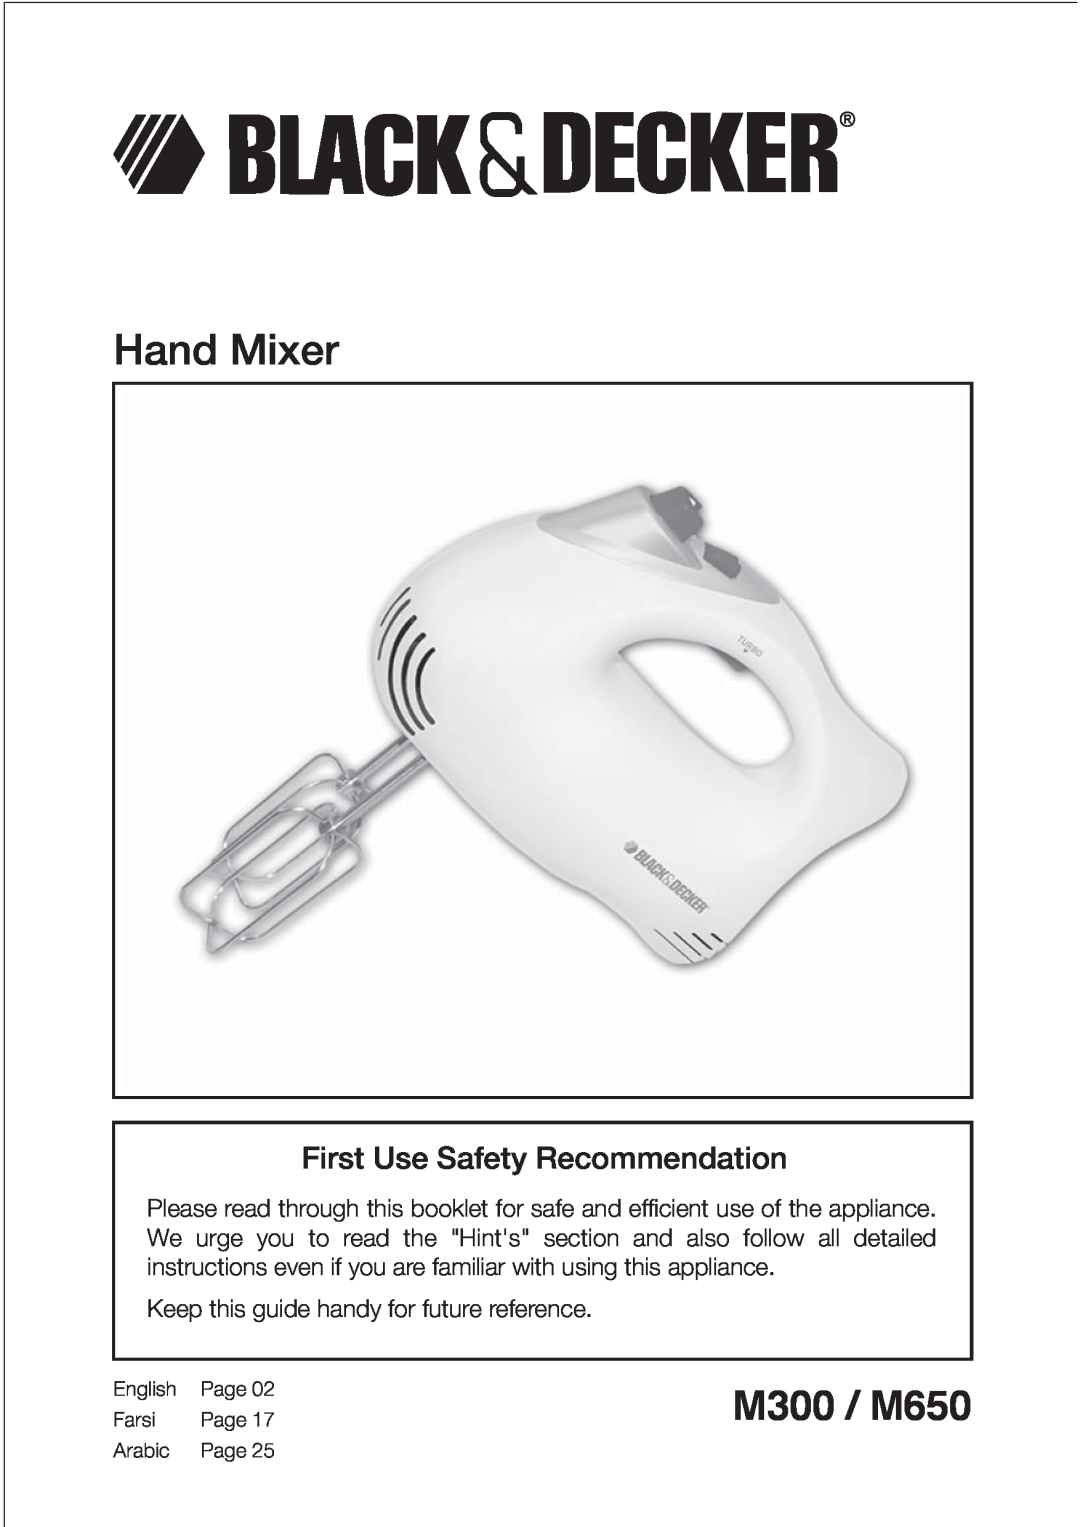 Black & Decker manual Hand Mixer, M300 / M650, First Use Safety Recommendation 